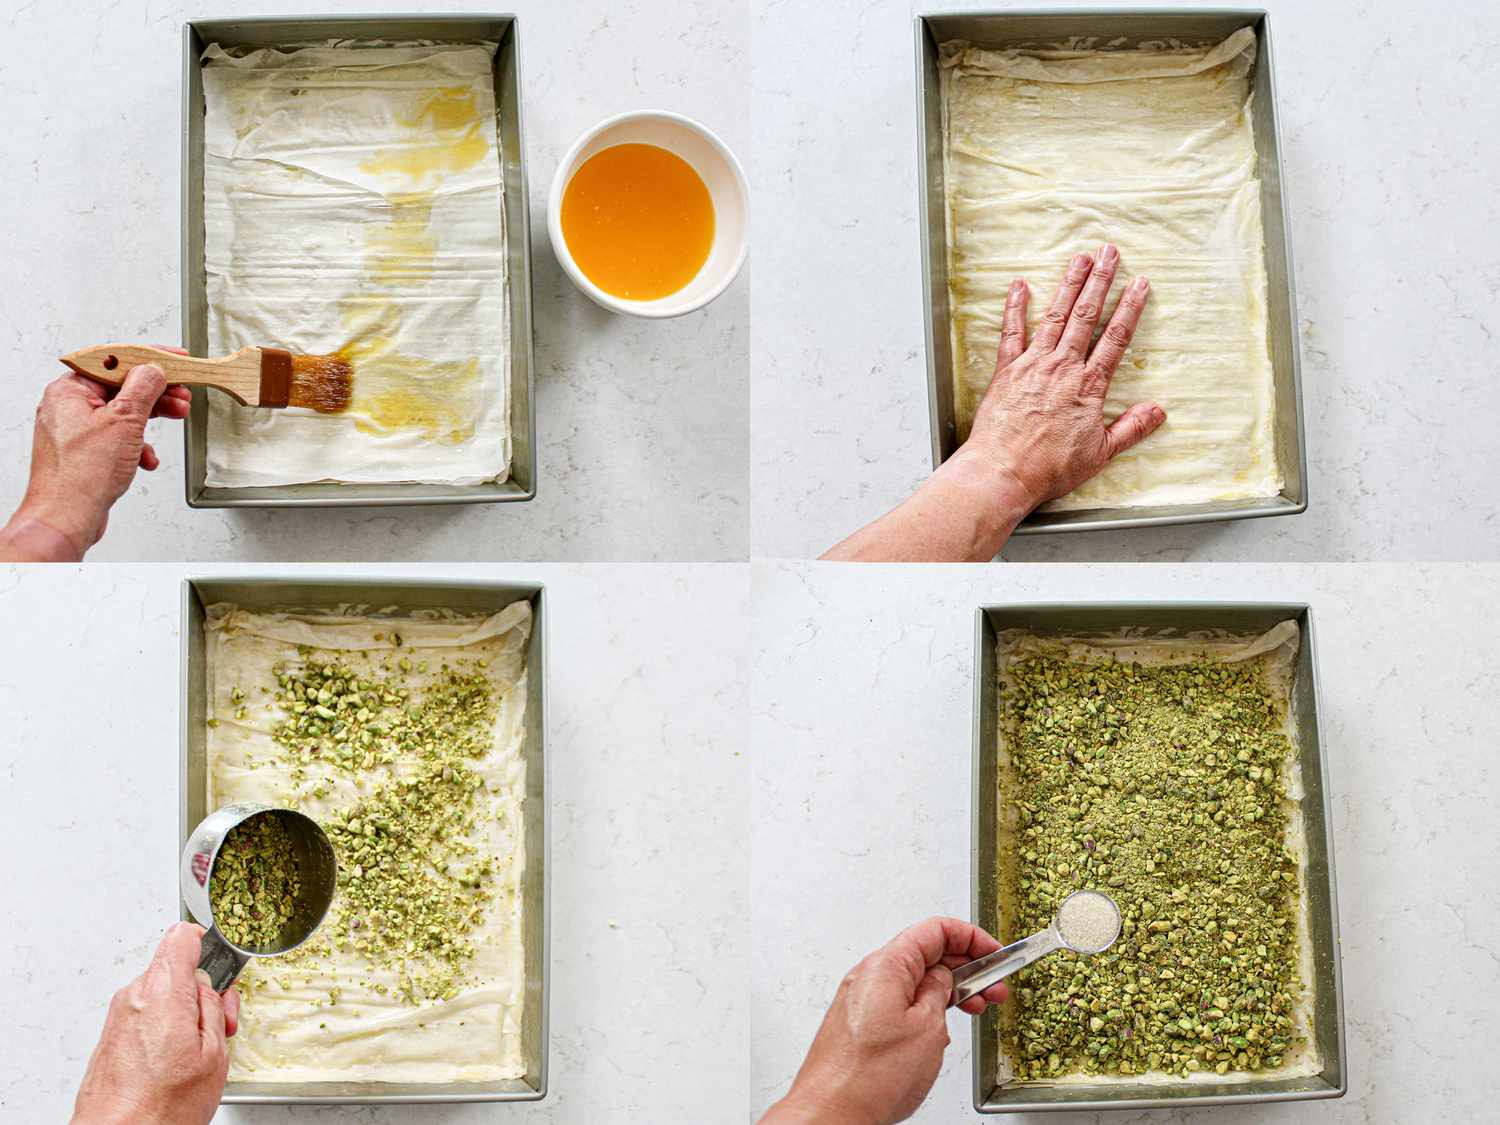 Four image collage of constructing baklava